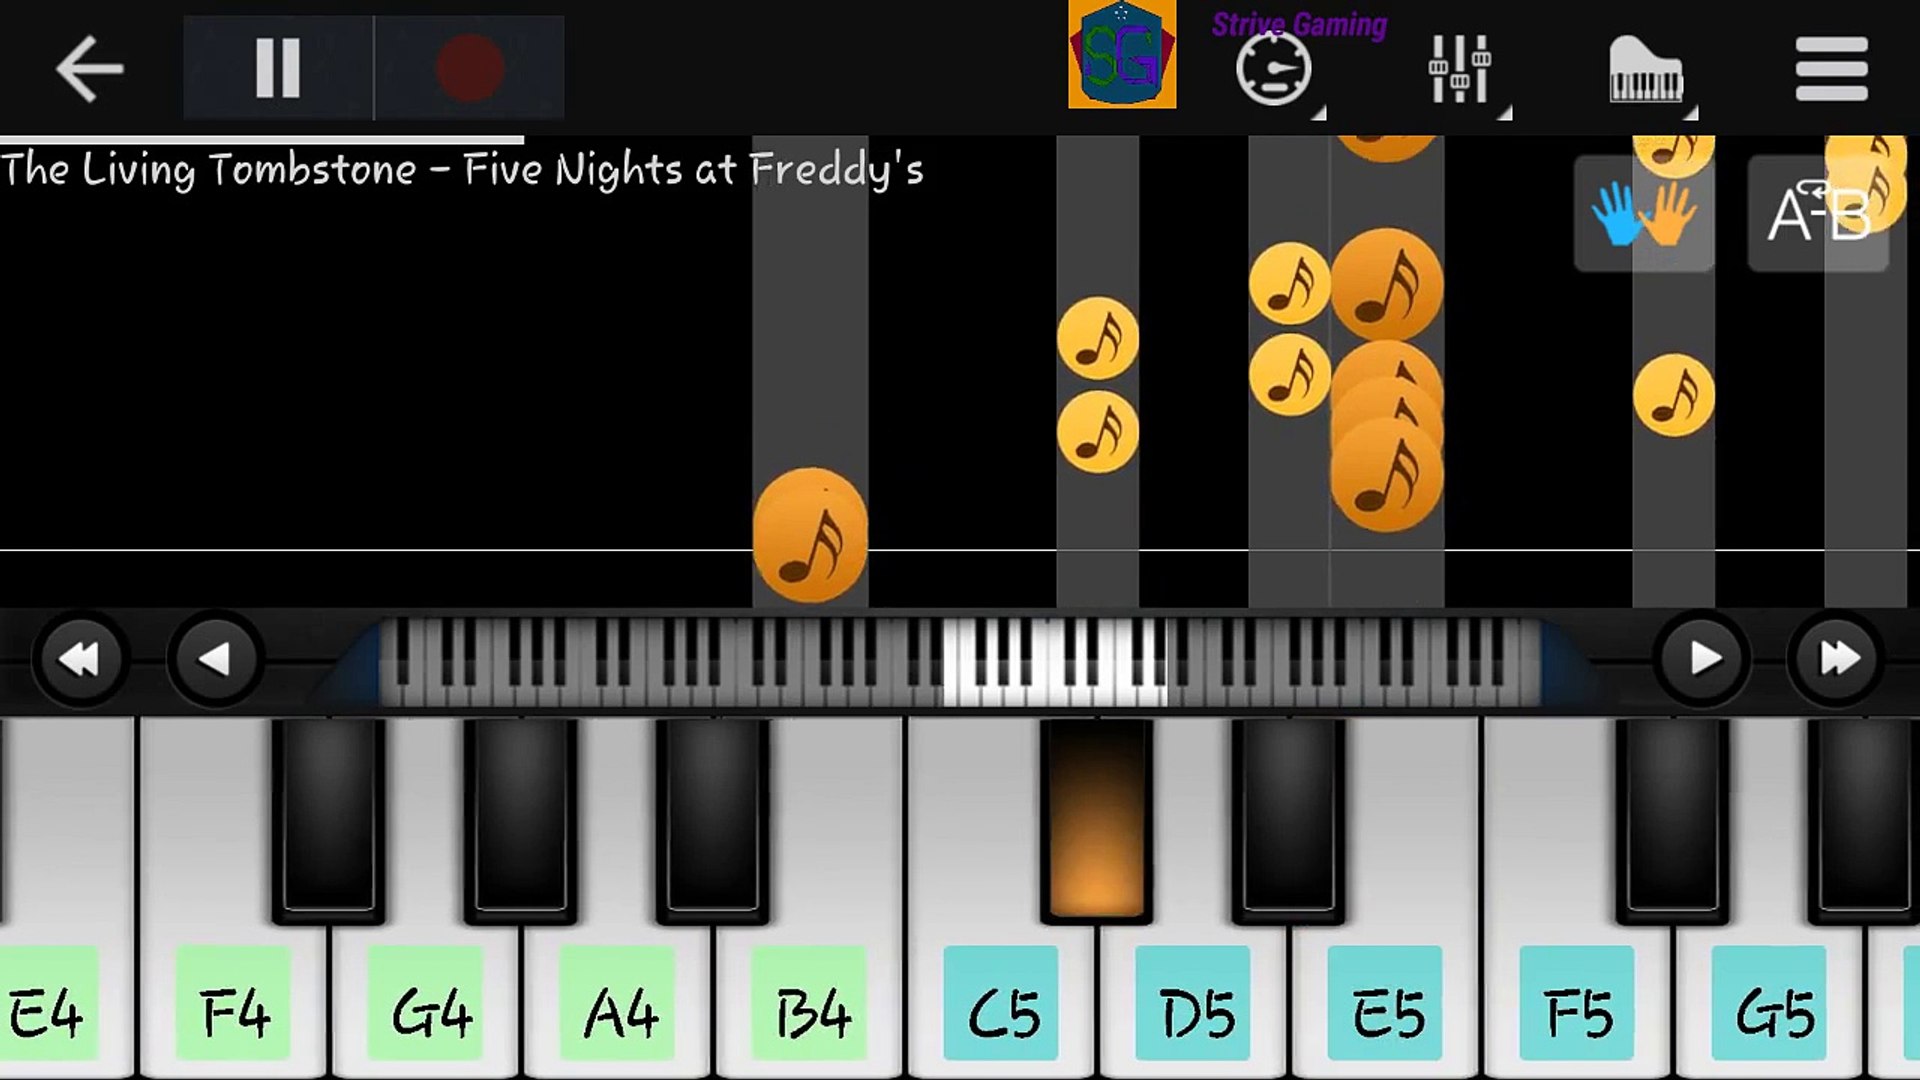 Five Nights at Freddy's 1 Song - The Living Tombstone (Piano